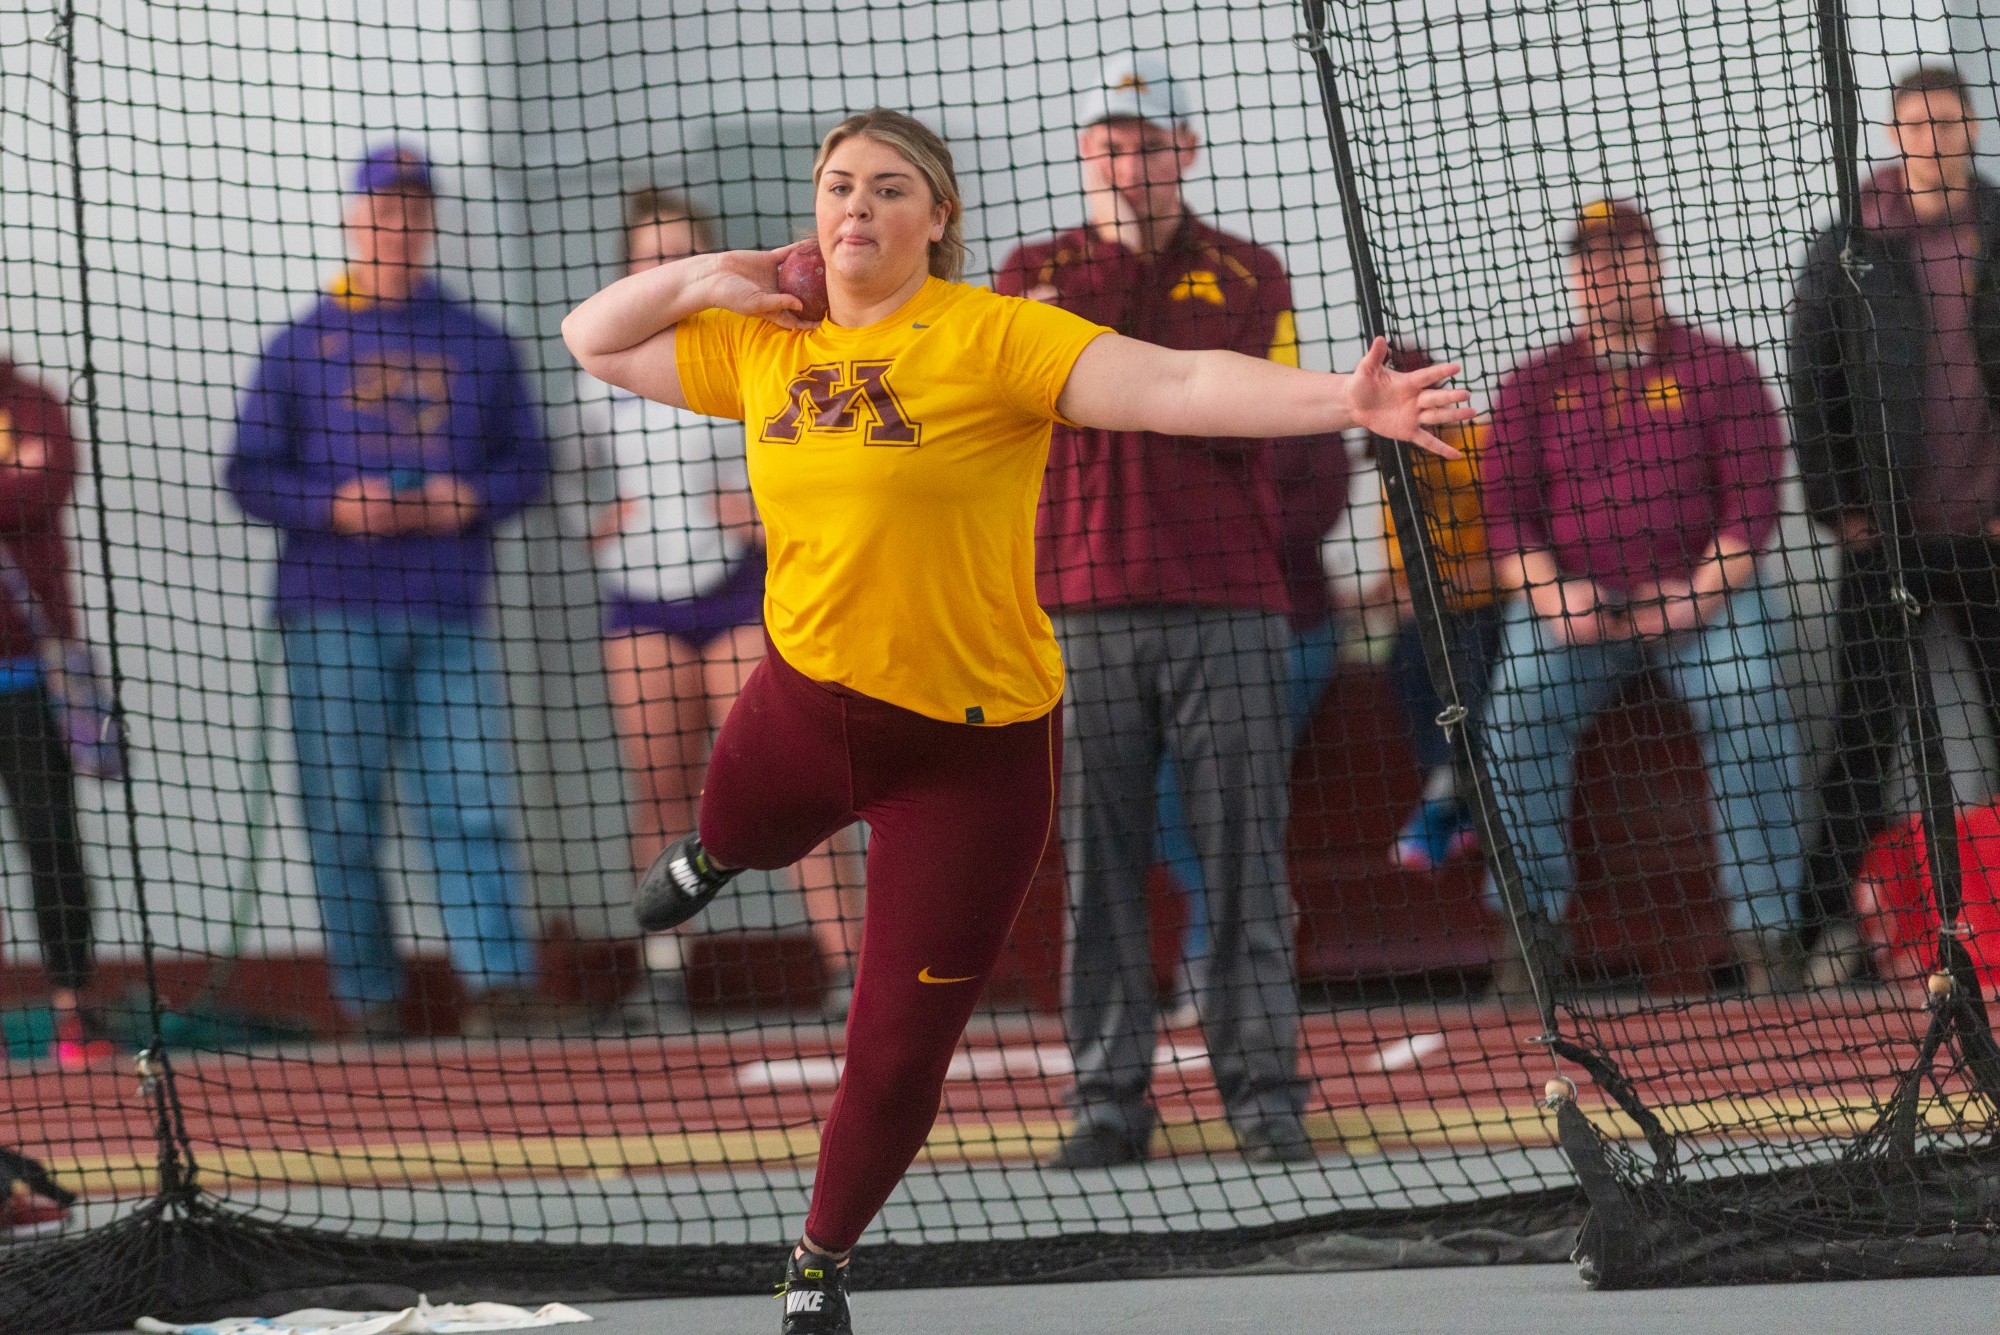 Gophers Redshirt Senior Shay Nielsen warms up to compete in the Minnesota Cold Classic at the University of Minnesota Fieldhouse on Friday, Feb. 21.